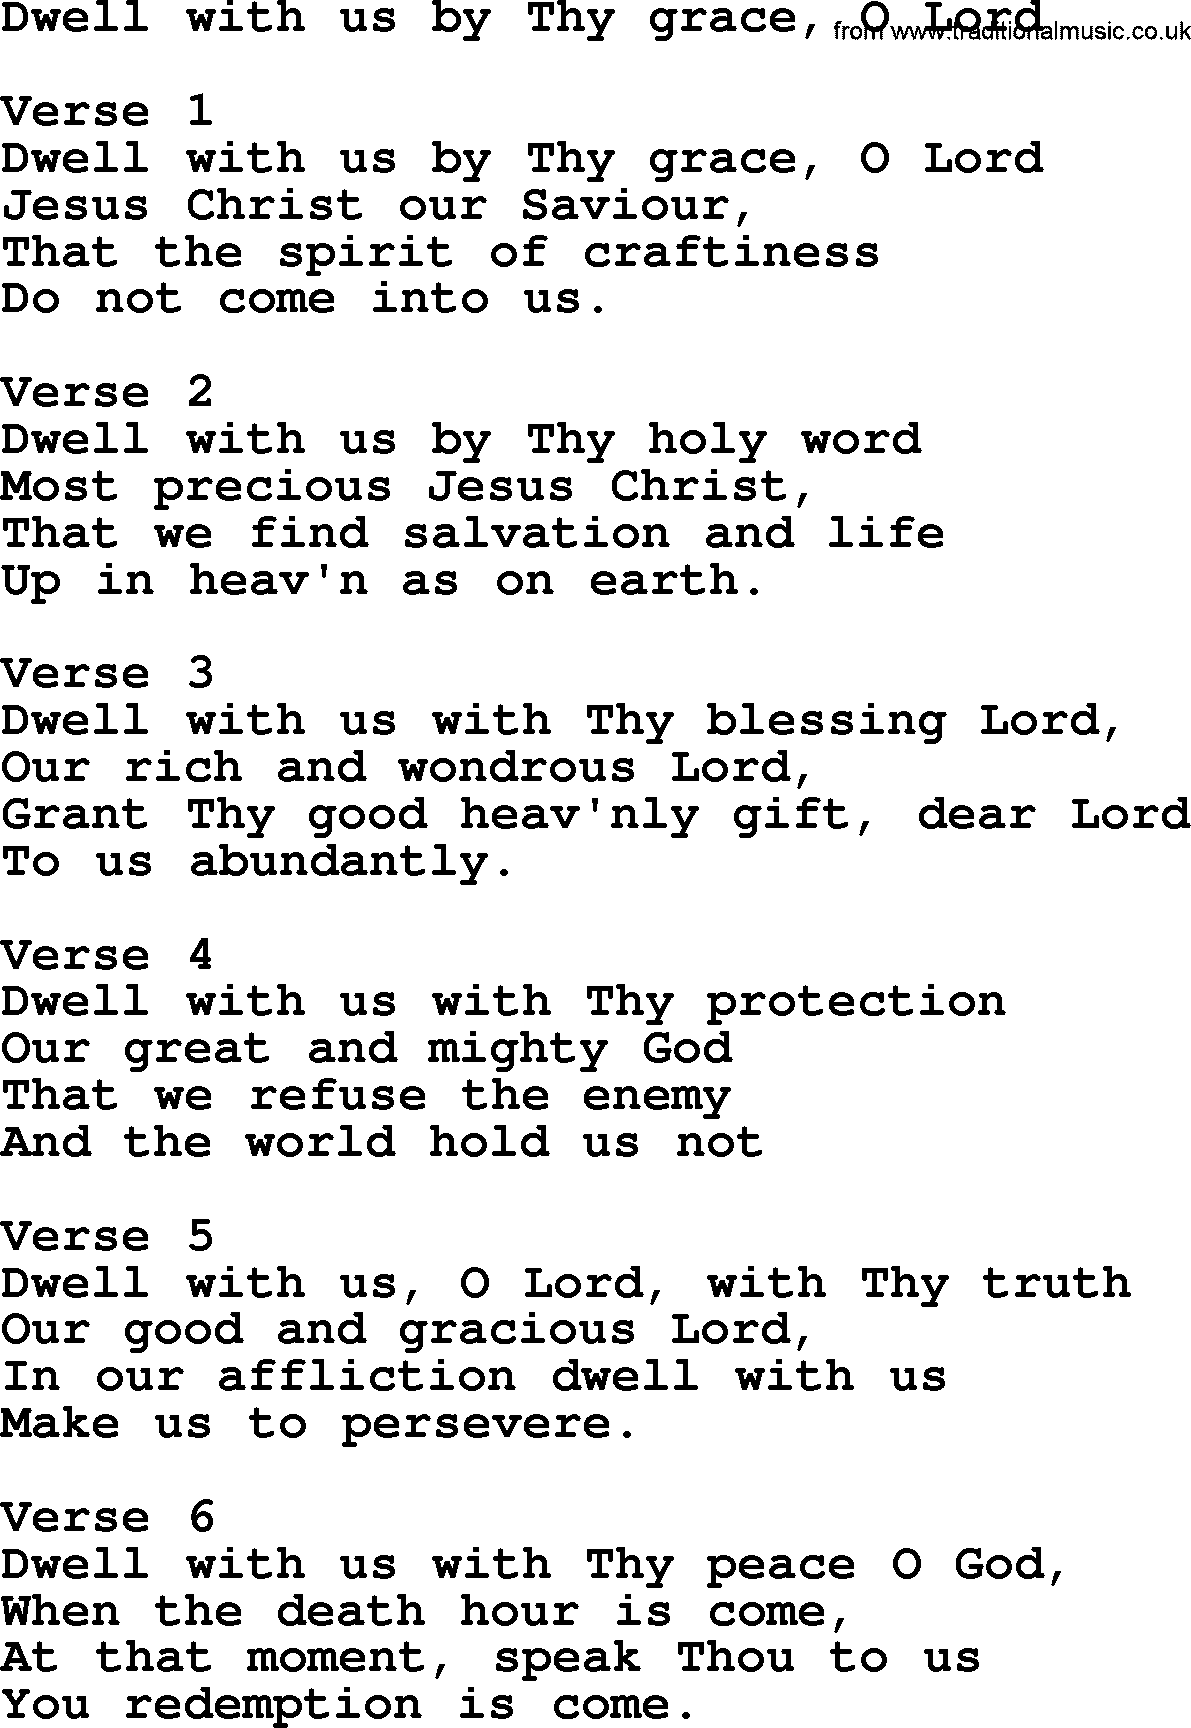 Apostolic and Pentecostal Hymns and Gospel Songs, Hymn: Dwell With Us By Thy Grace, O Lord, Christian lyrics and PDF